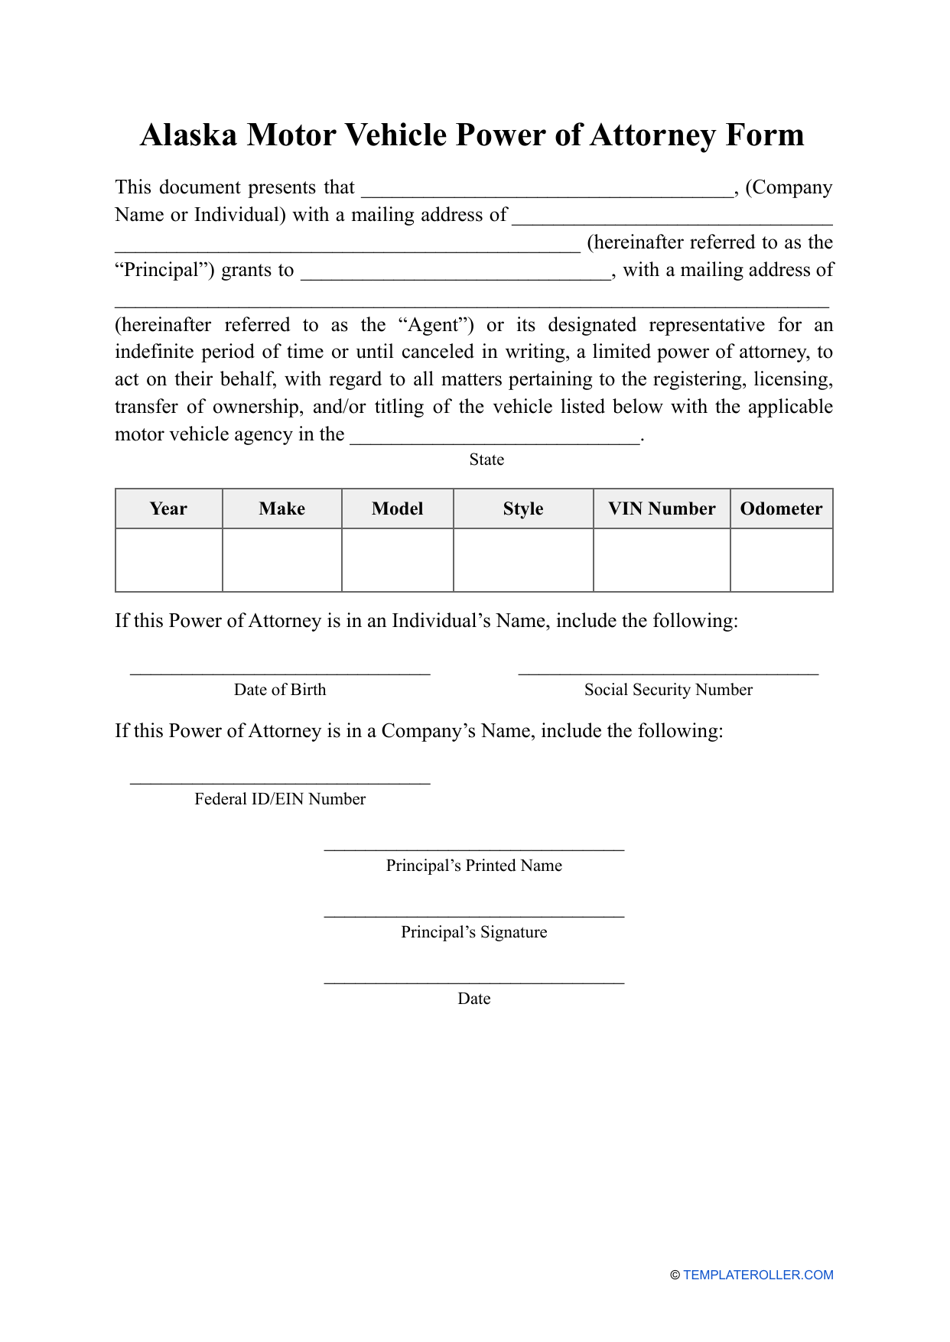 Motor Vehicle Power of Attorney Form - Alaska, Page 1